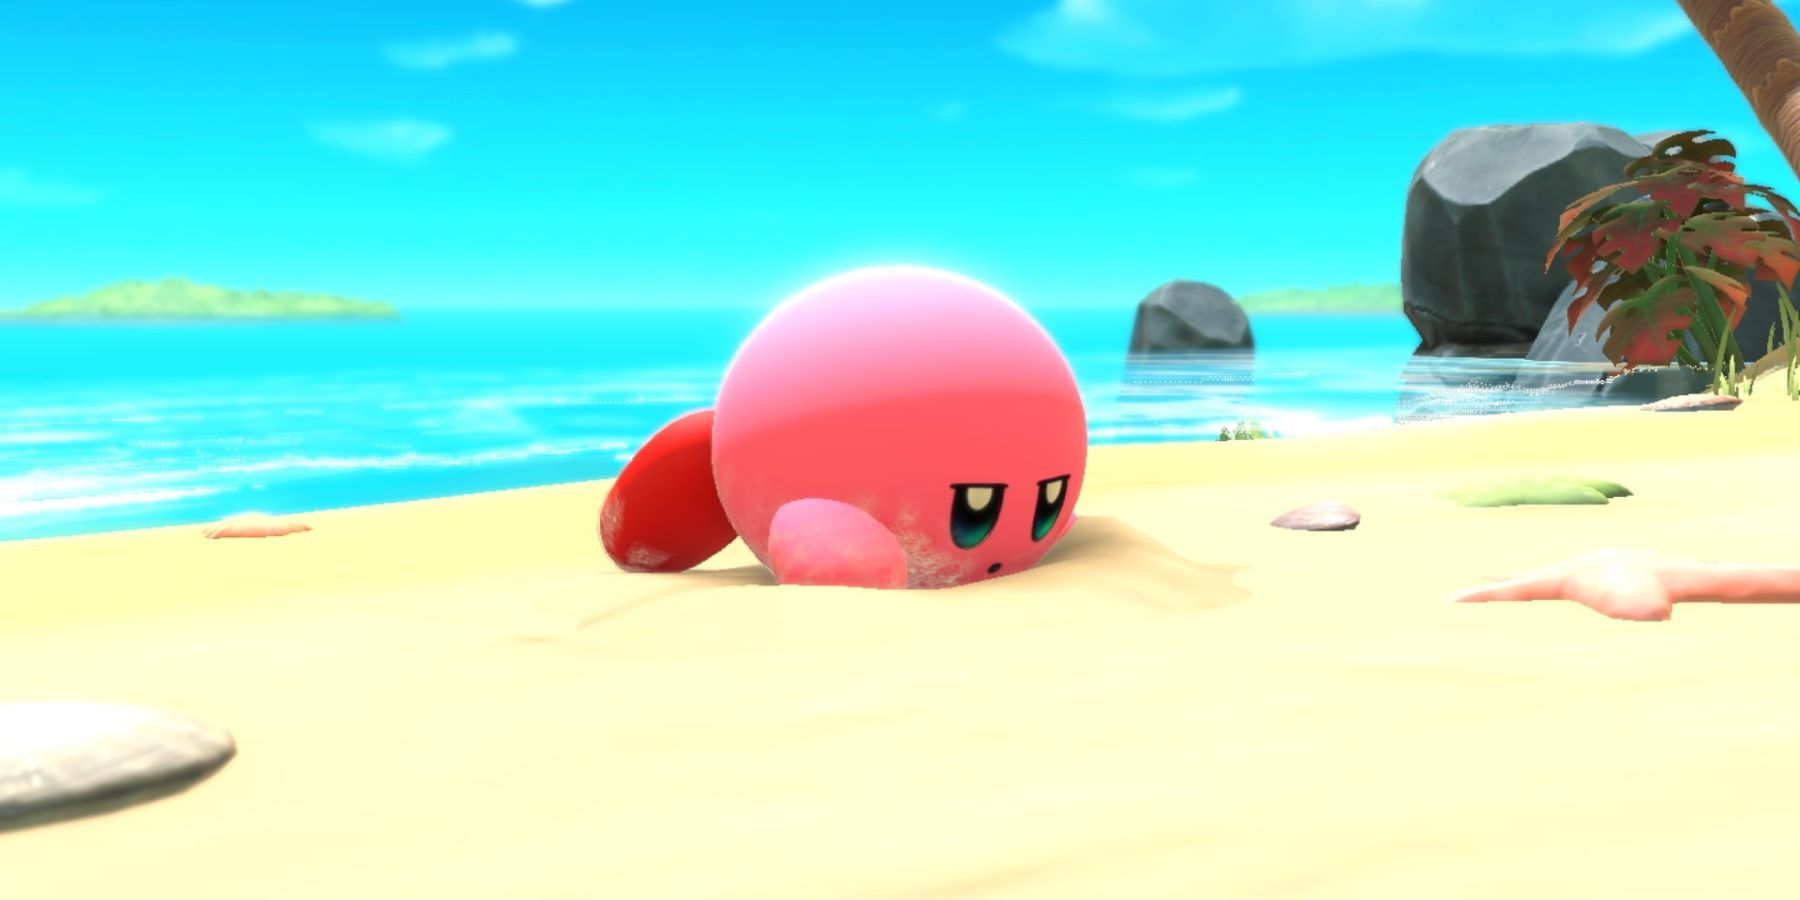 Kirby waking up on the beach in Nintendo's reveal trailer for Kirby and the Forgotten Land